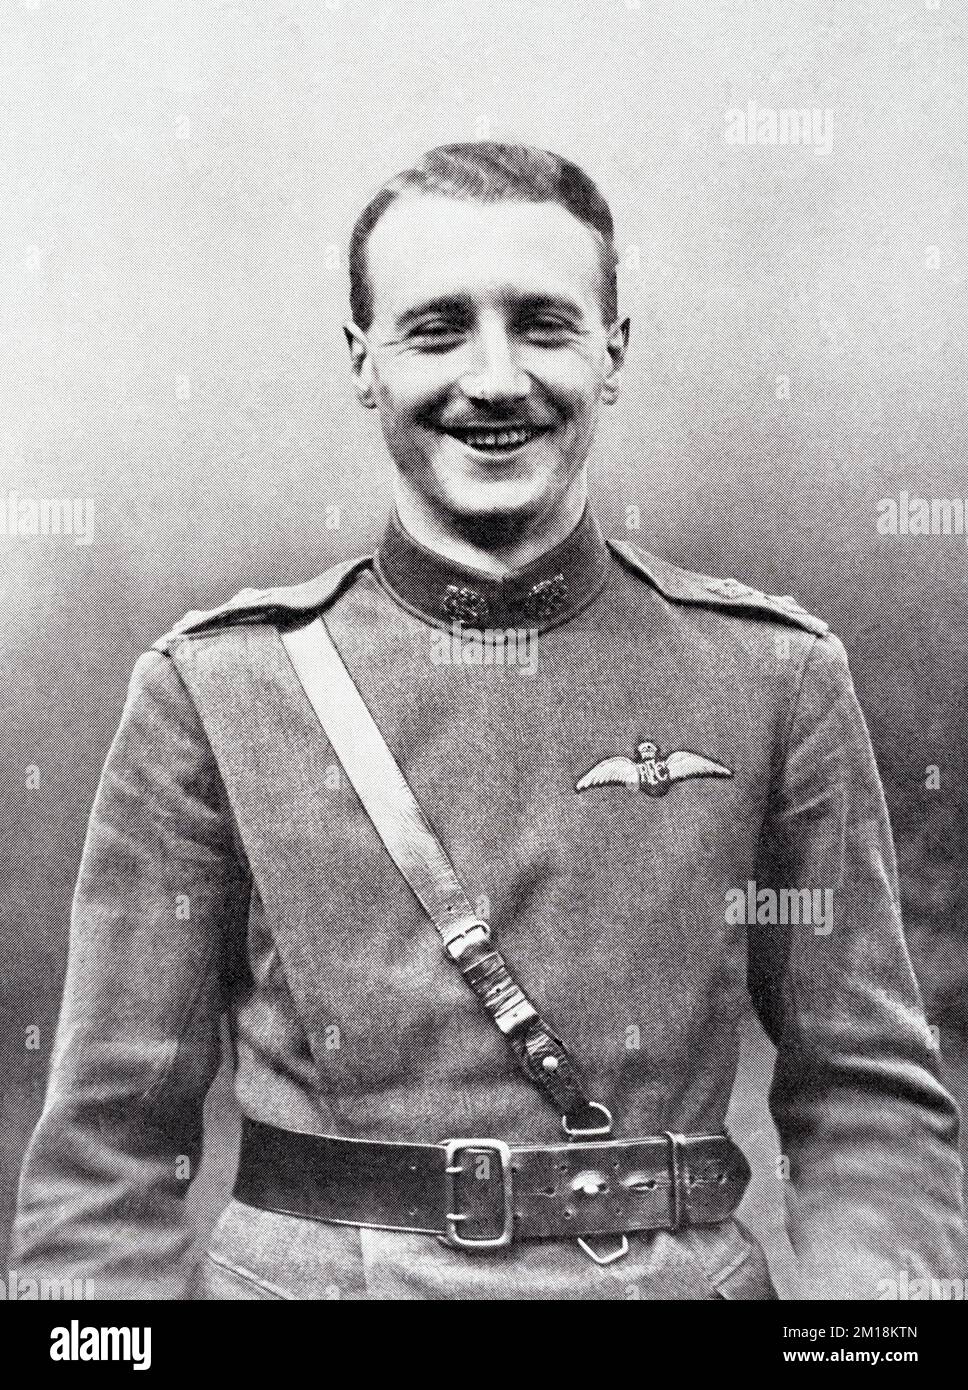 Lieutenant Leefe Robinson of the Royal Flying Crops, who won a Victoria Cross during the First World War for being the first to shoot down a German airship over Britain, c.1916. Stock Photo